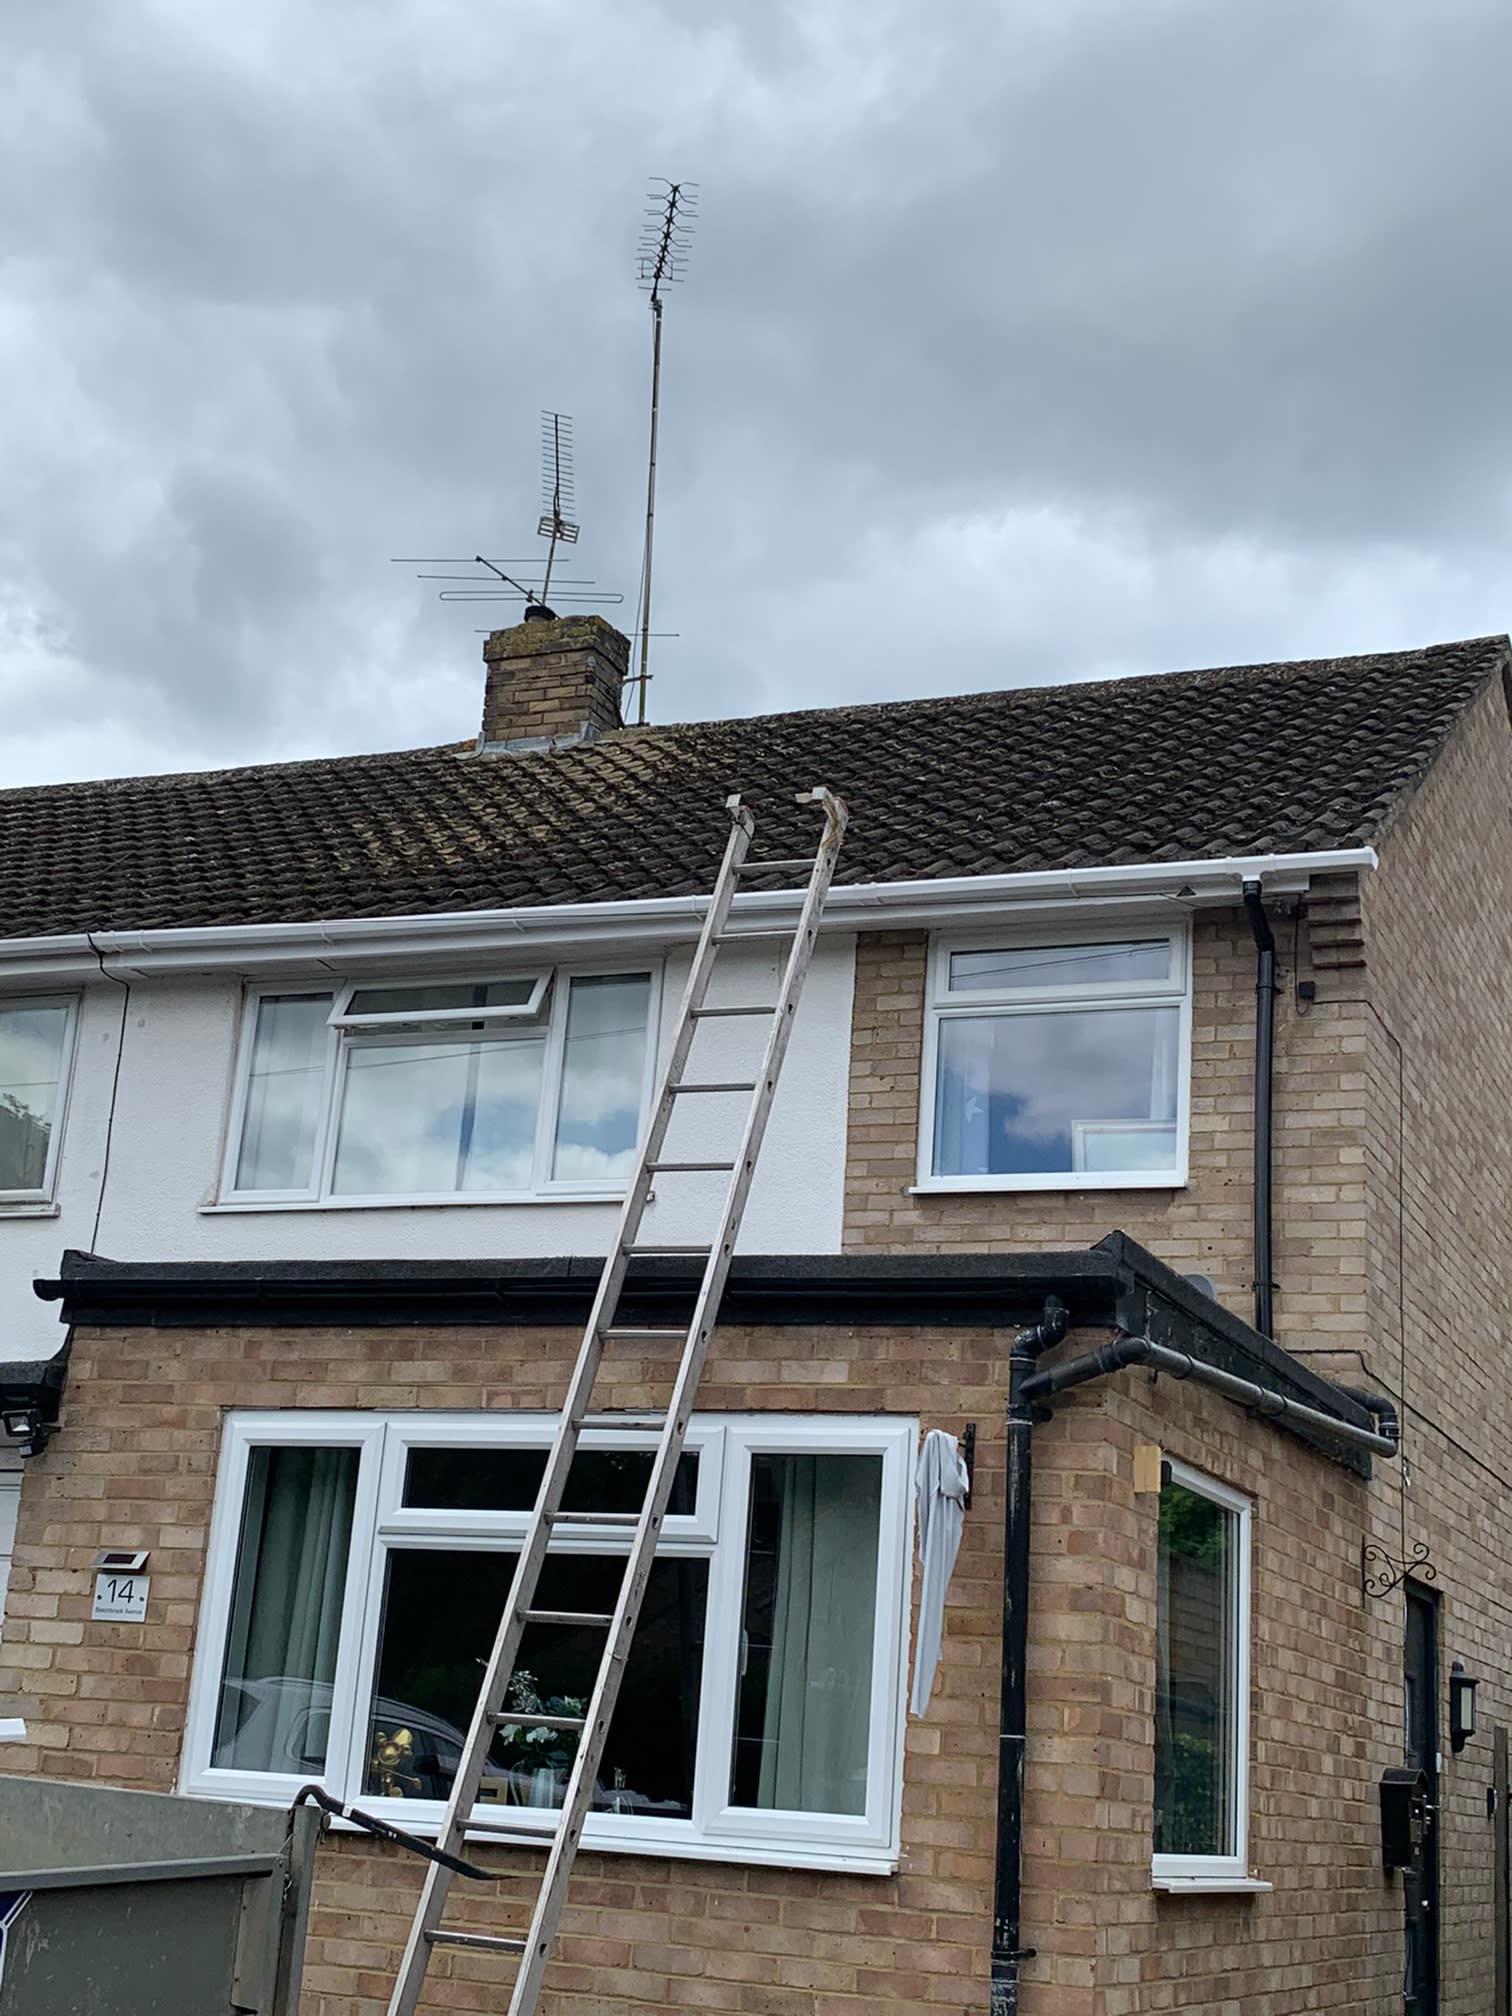 Images Tony's Roofing and Guttering Services